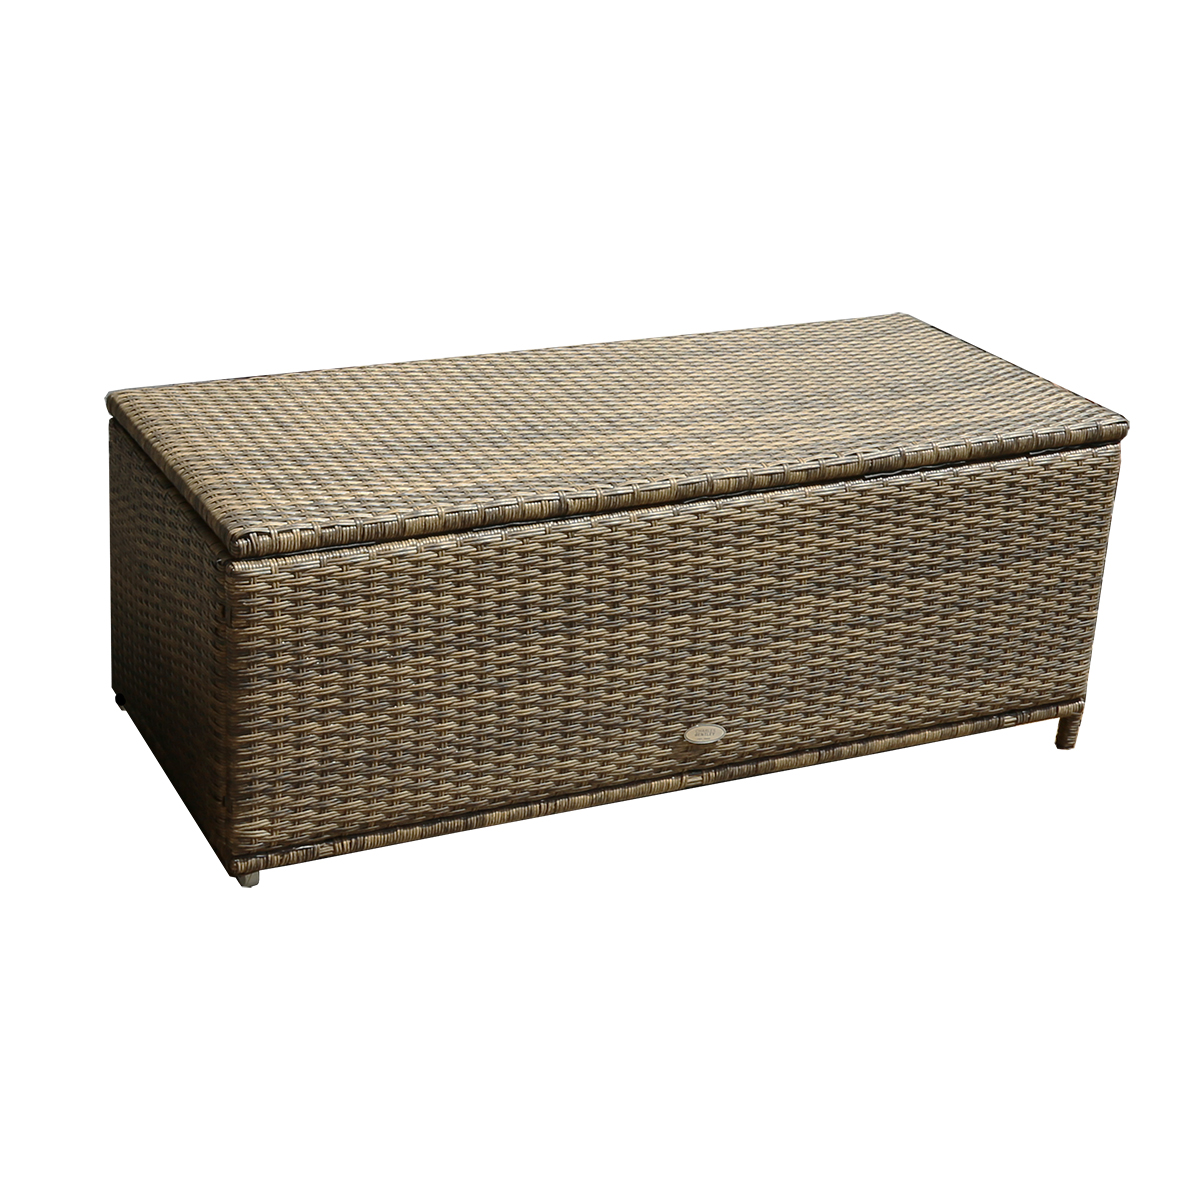 Charles Bentley Rattan Garden Storage Box Available In Grey And Natural Natural